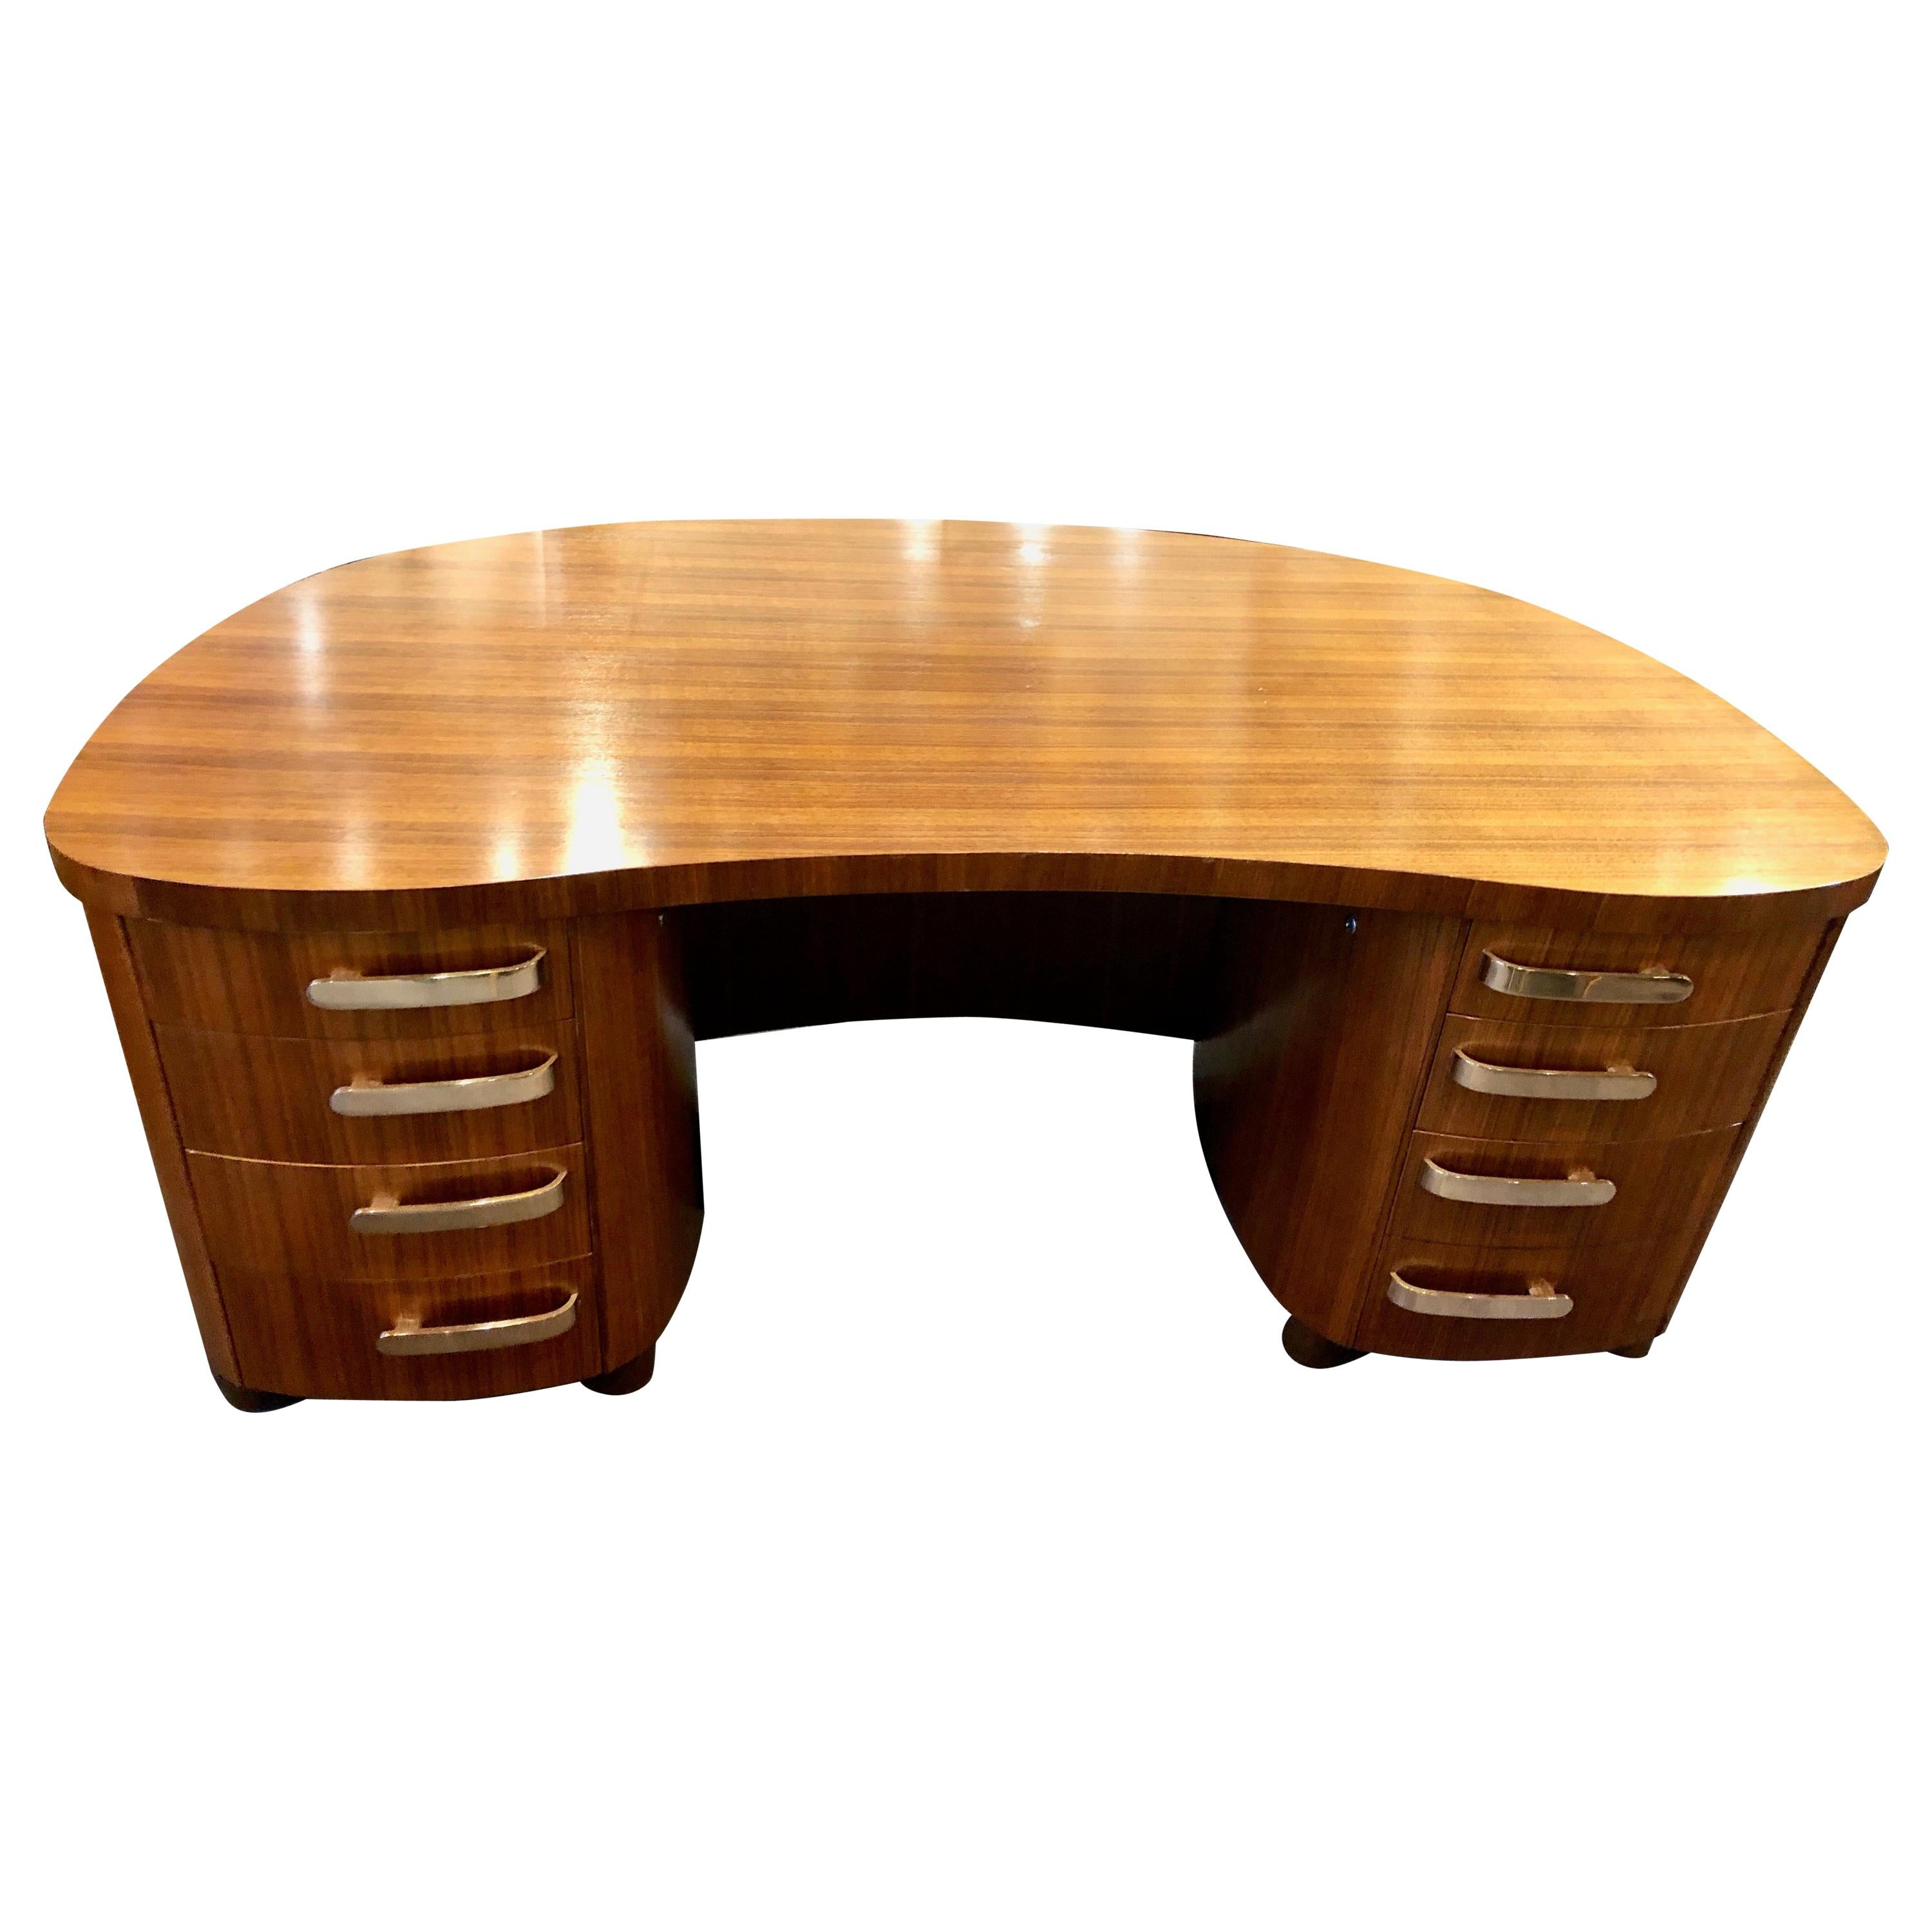 Professional Art Deco Midcentury Desk by Stow and Davis